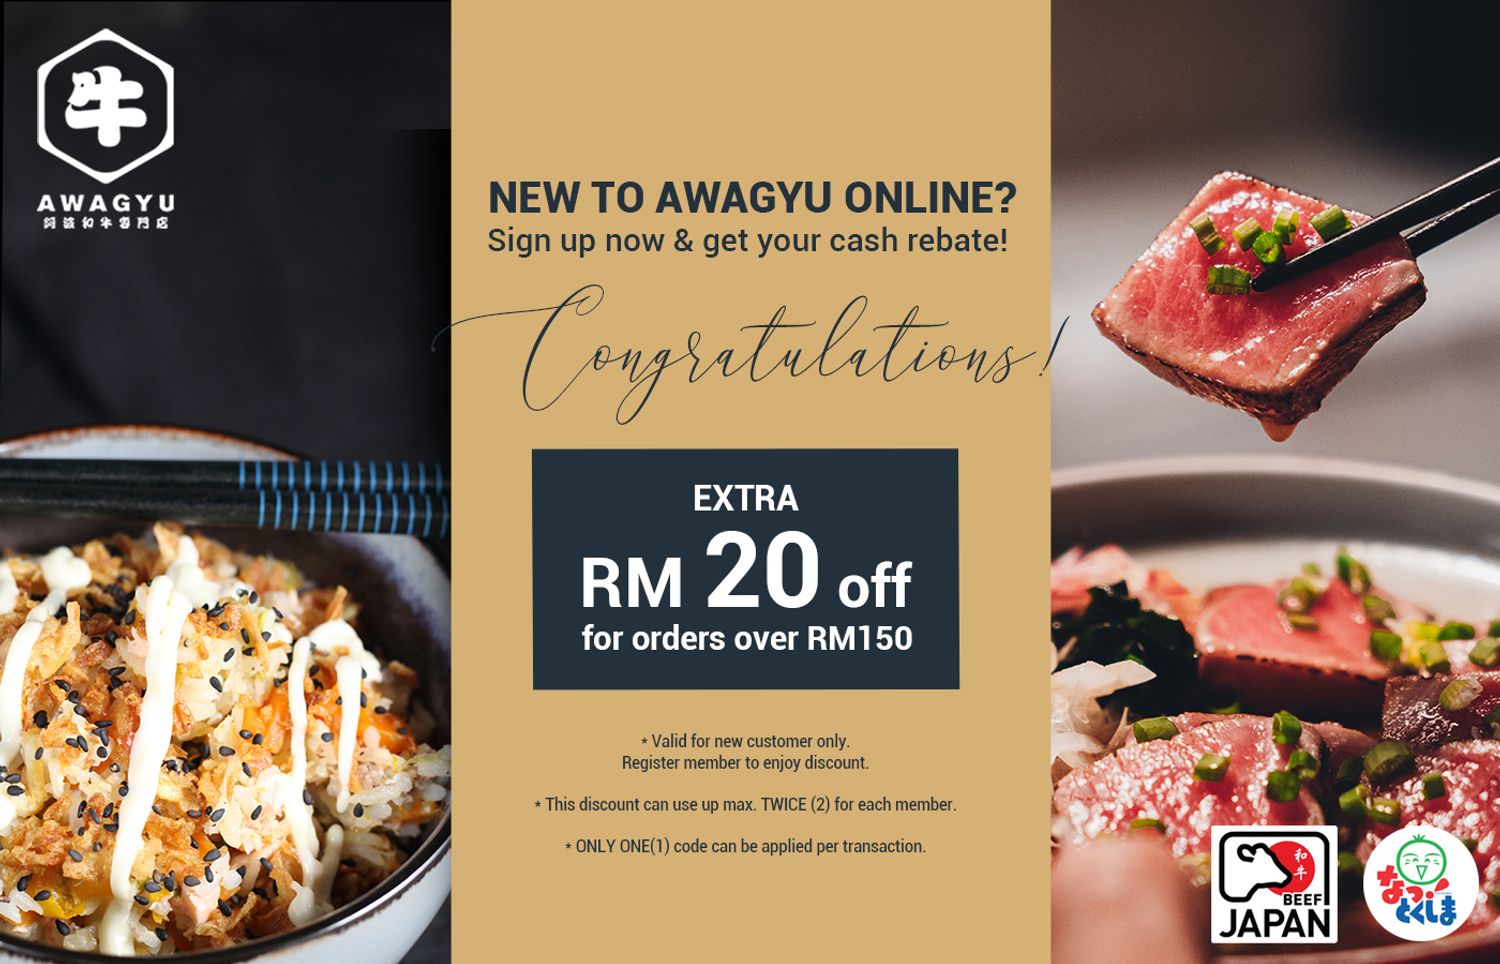 AWAGYU RESTAURANT OFFICIAL - Extra RM20 off for new customer